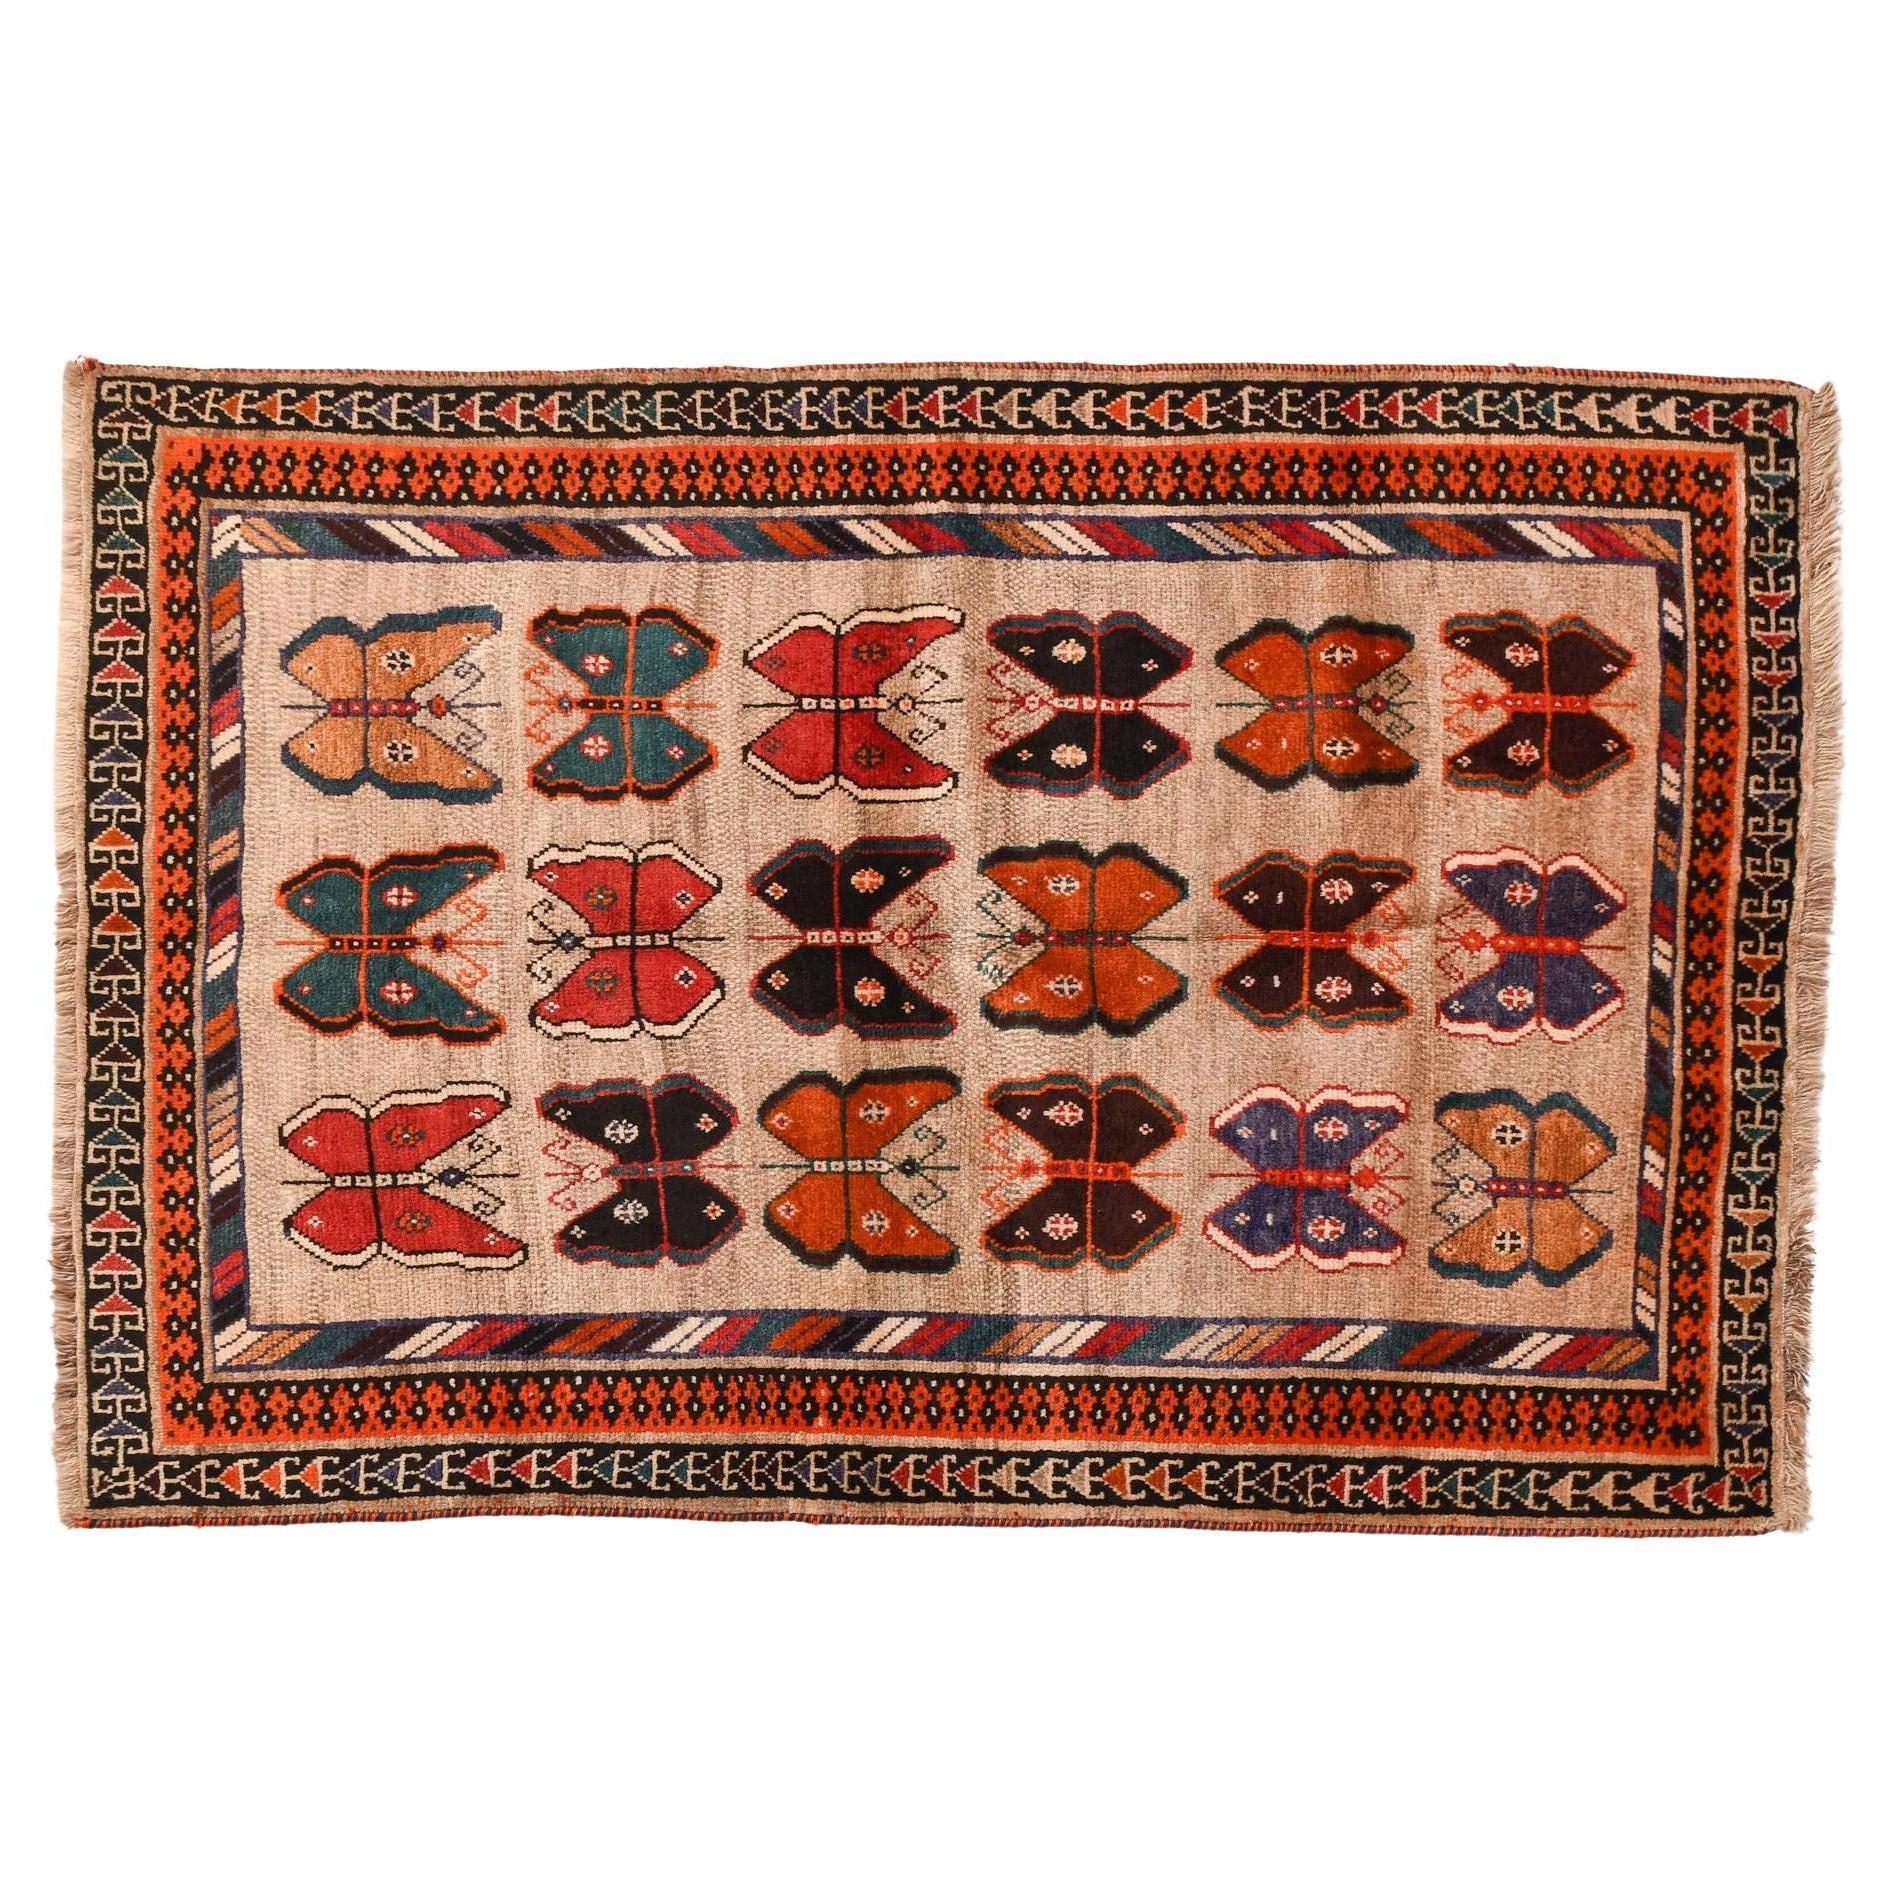 Nomadic Carpet from my Private Collection